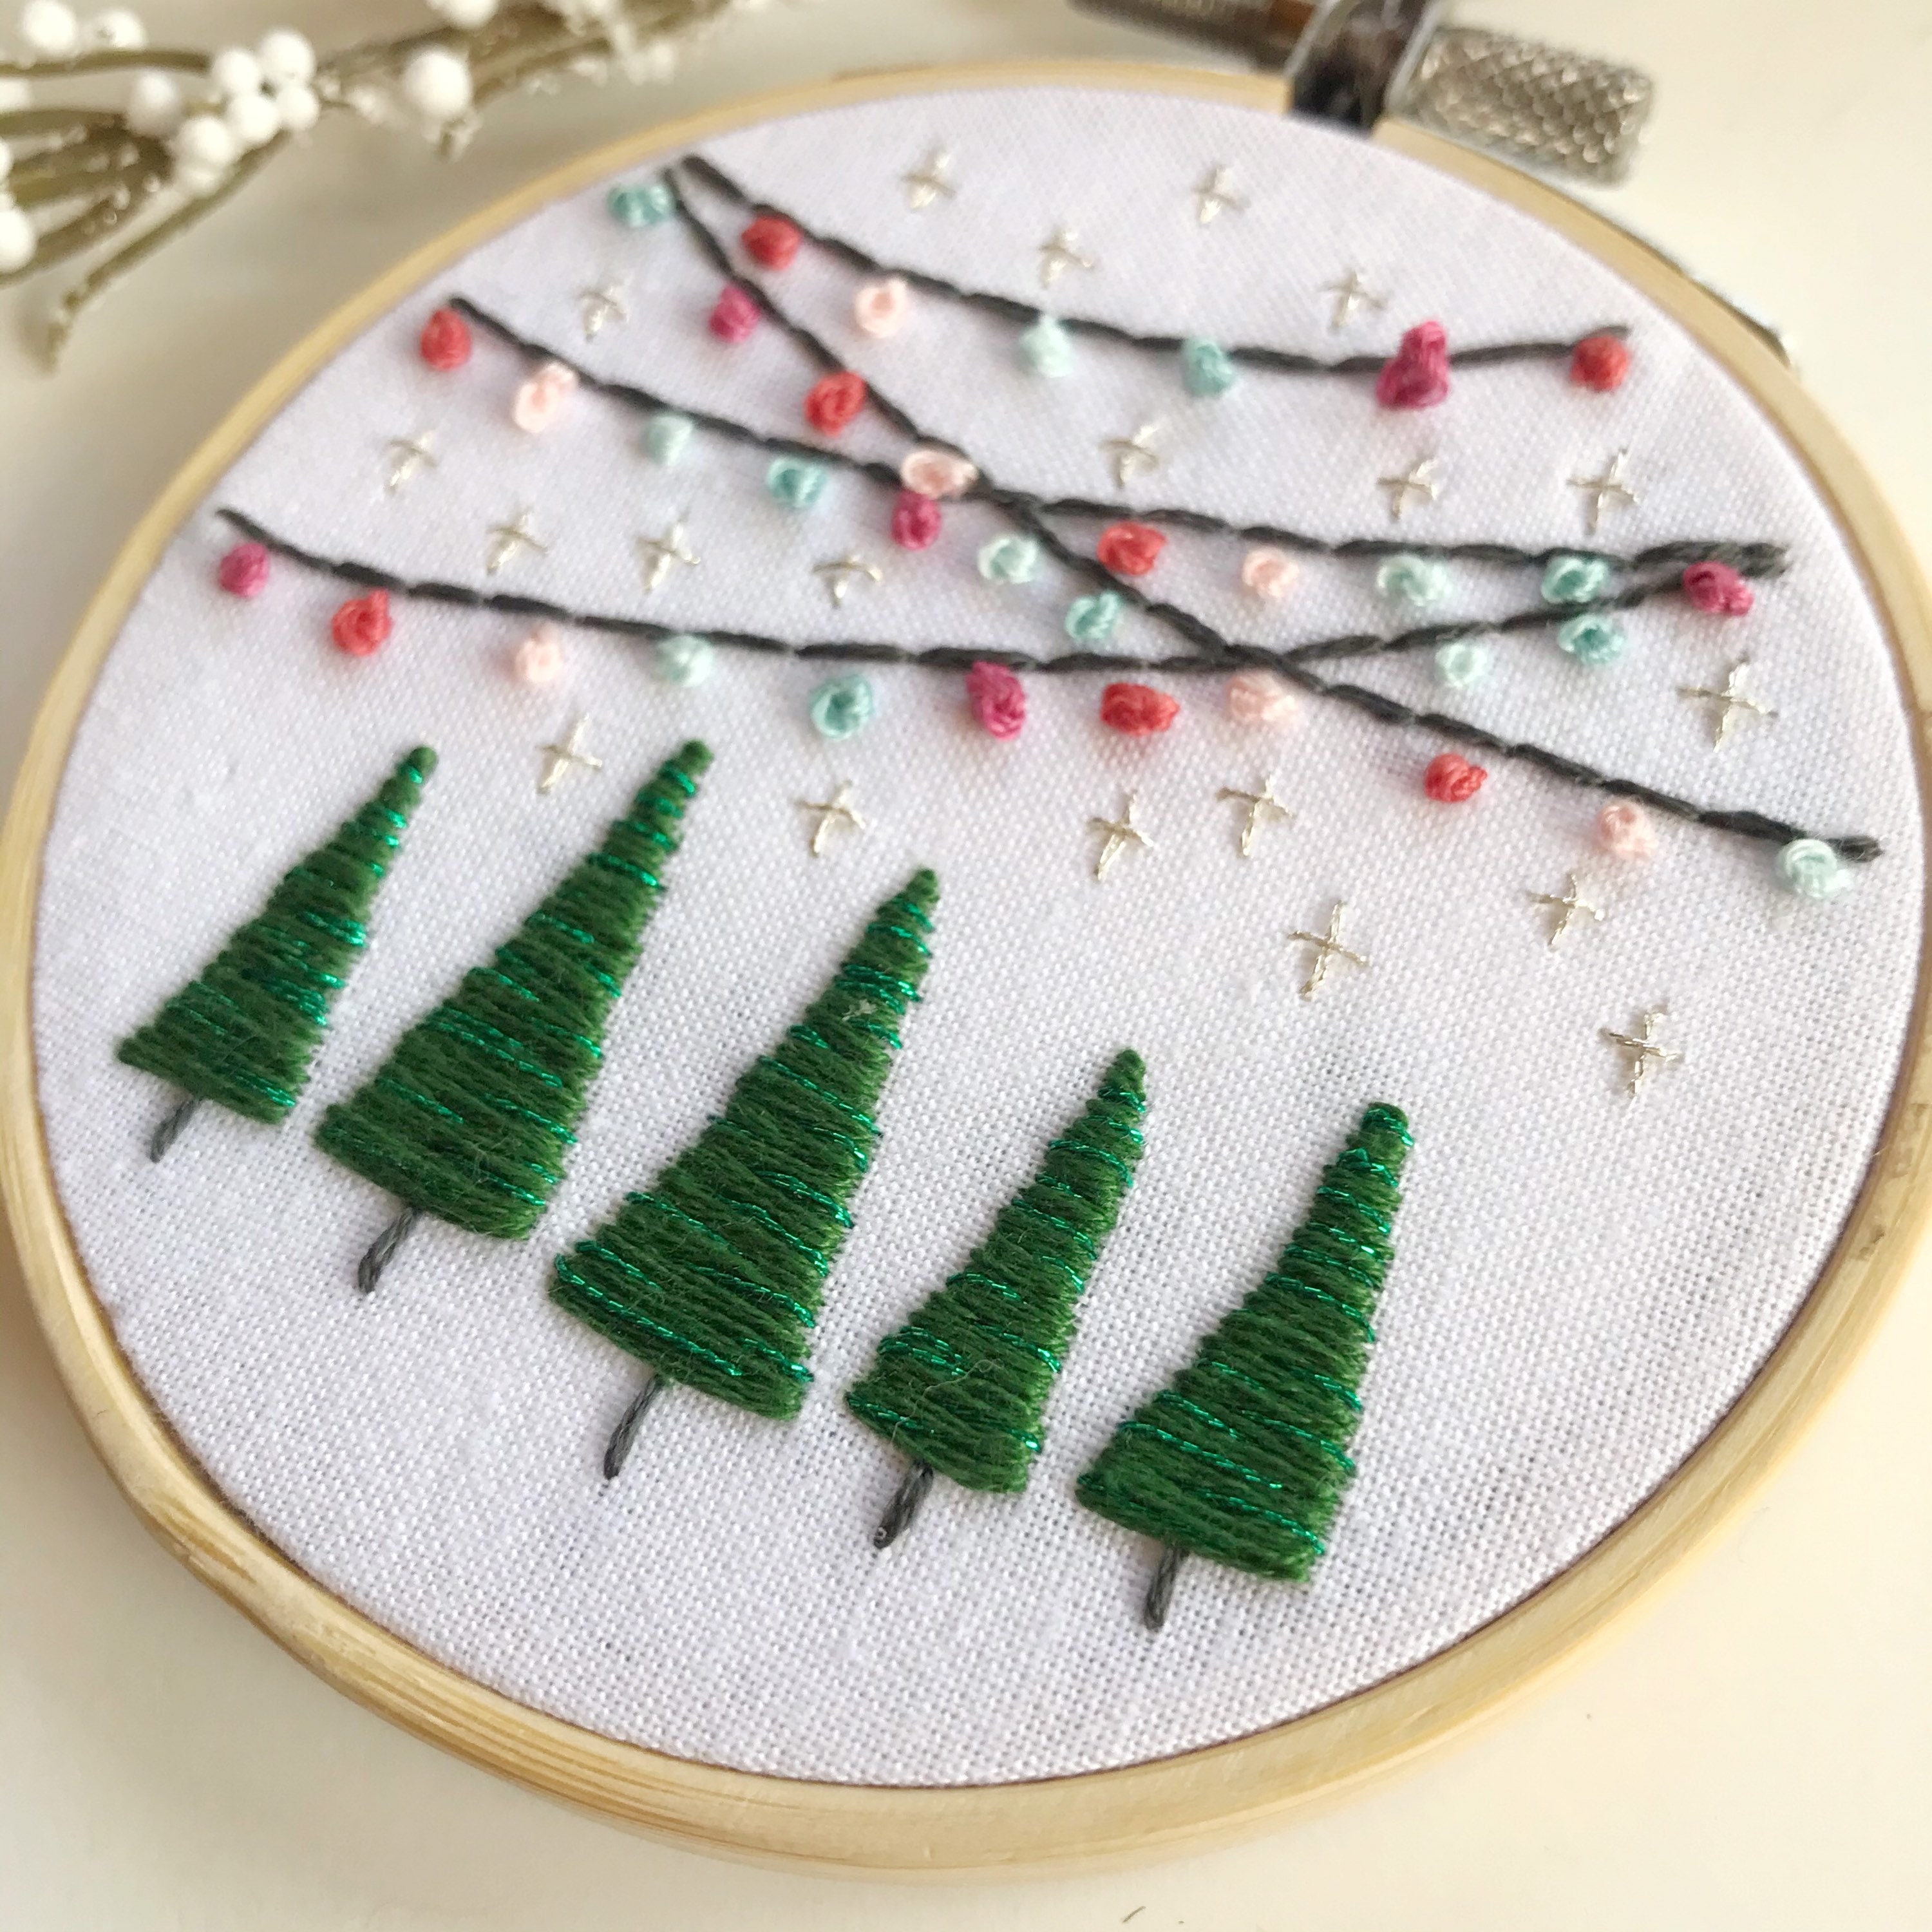 PDF Pattern: Bright Lights Ornament Christmas Embroidery | Etsy